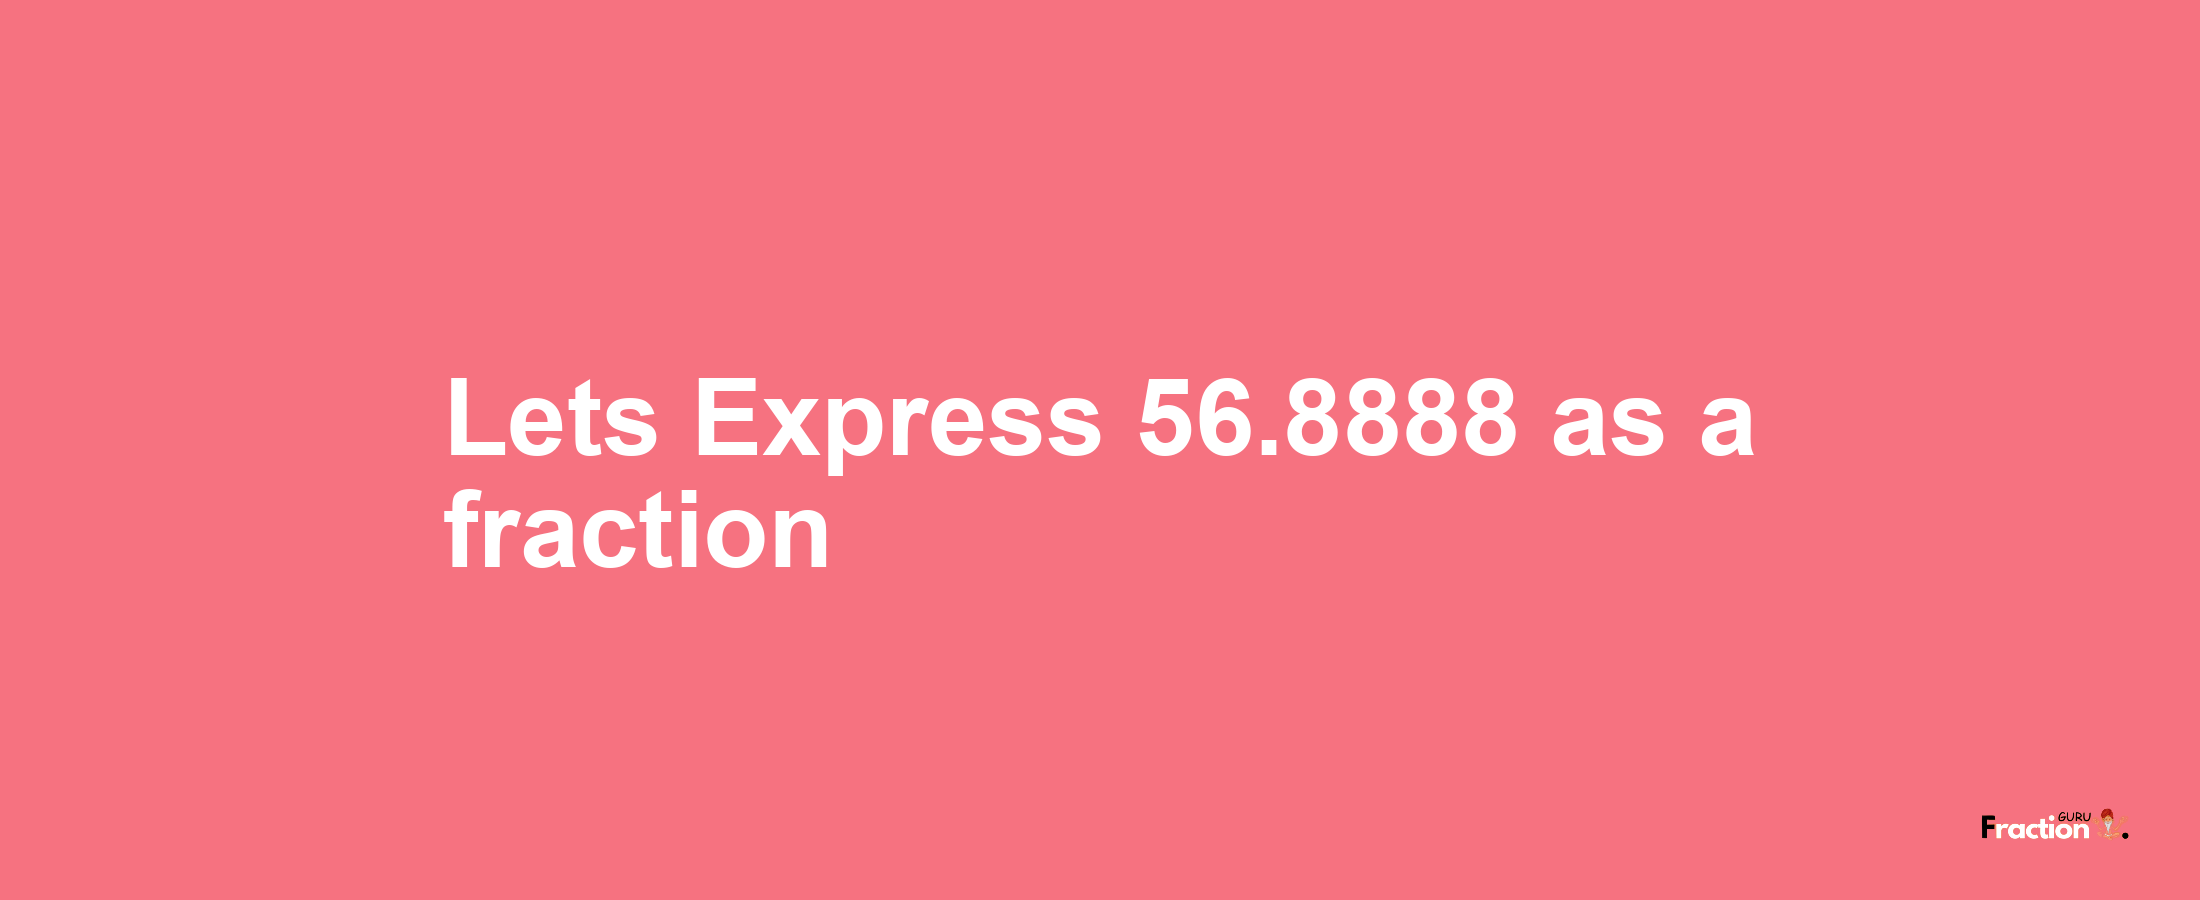 Lets Express 56.8888 as afraction